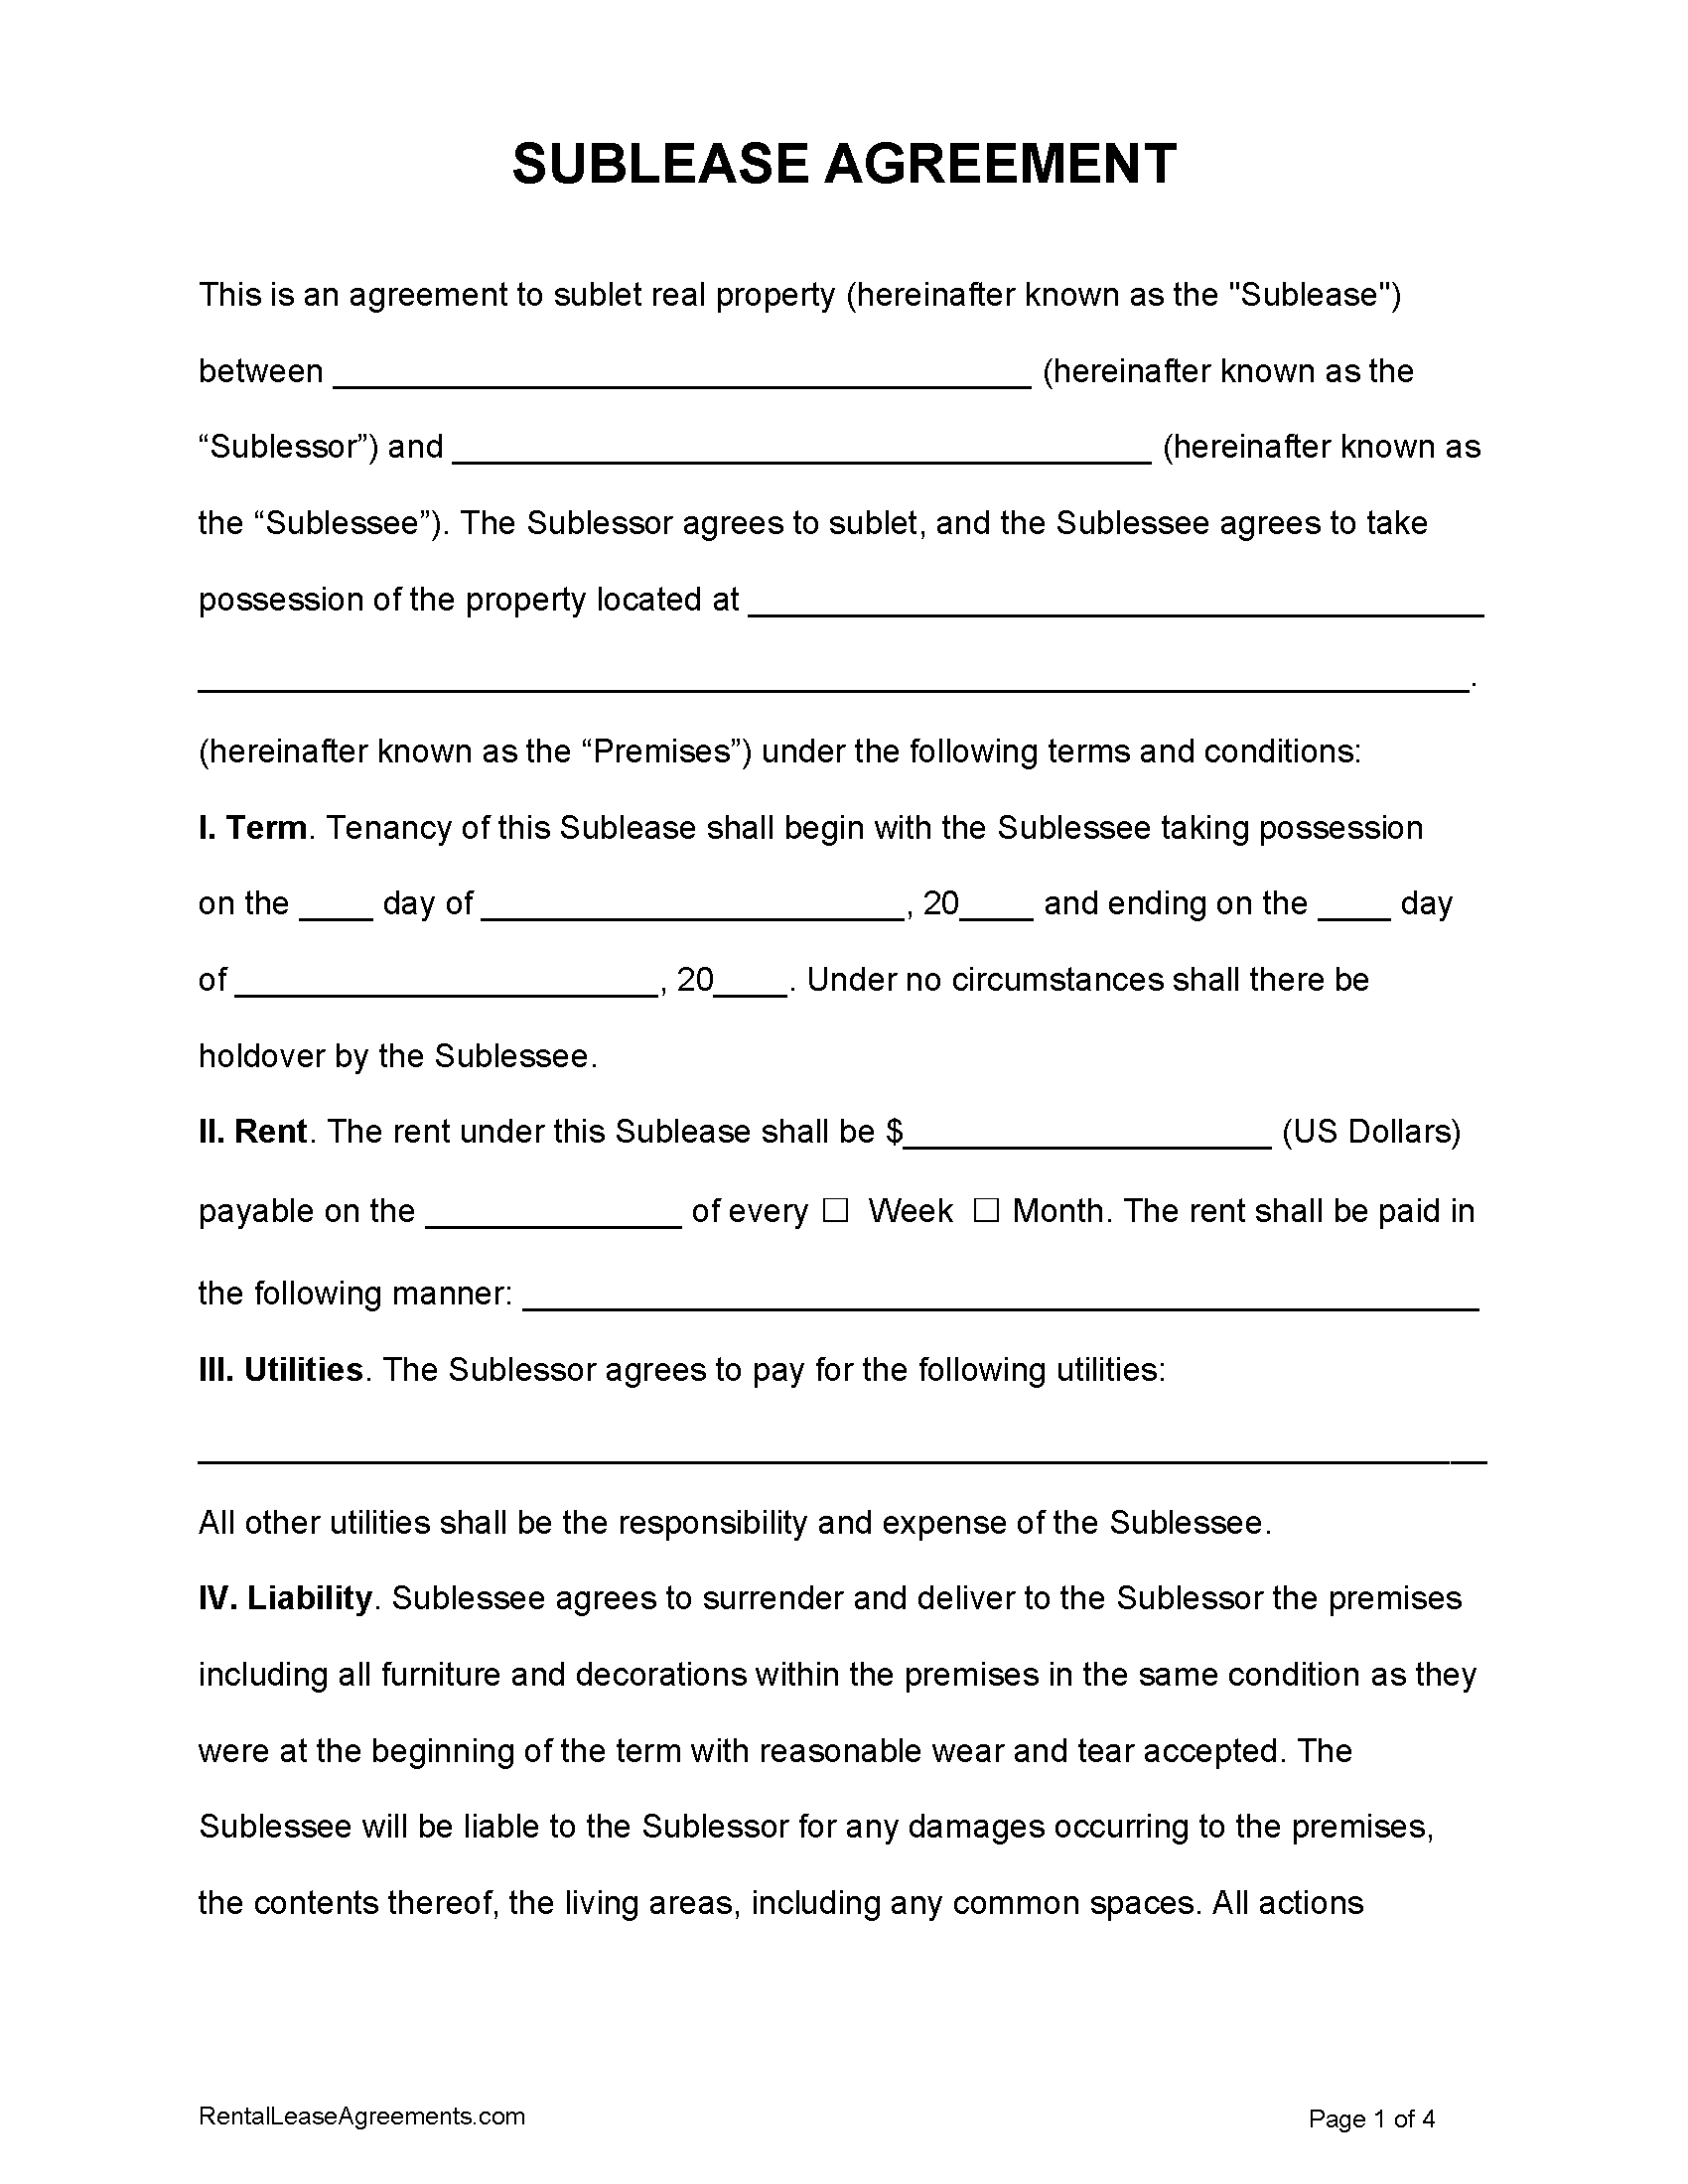 Free Sublease Agreement Template  PDF - Word In commercial cleaning service agreement template